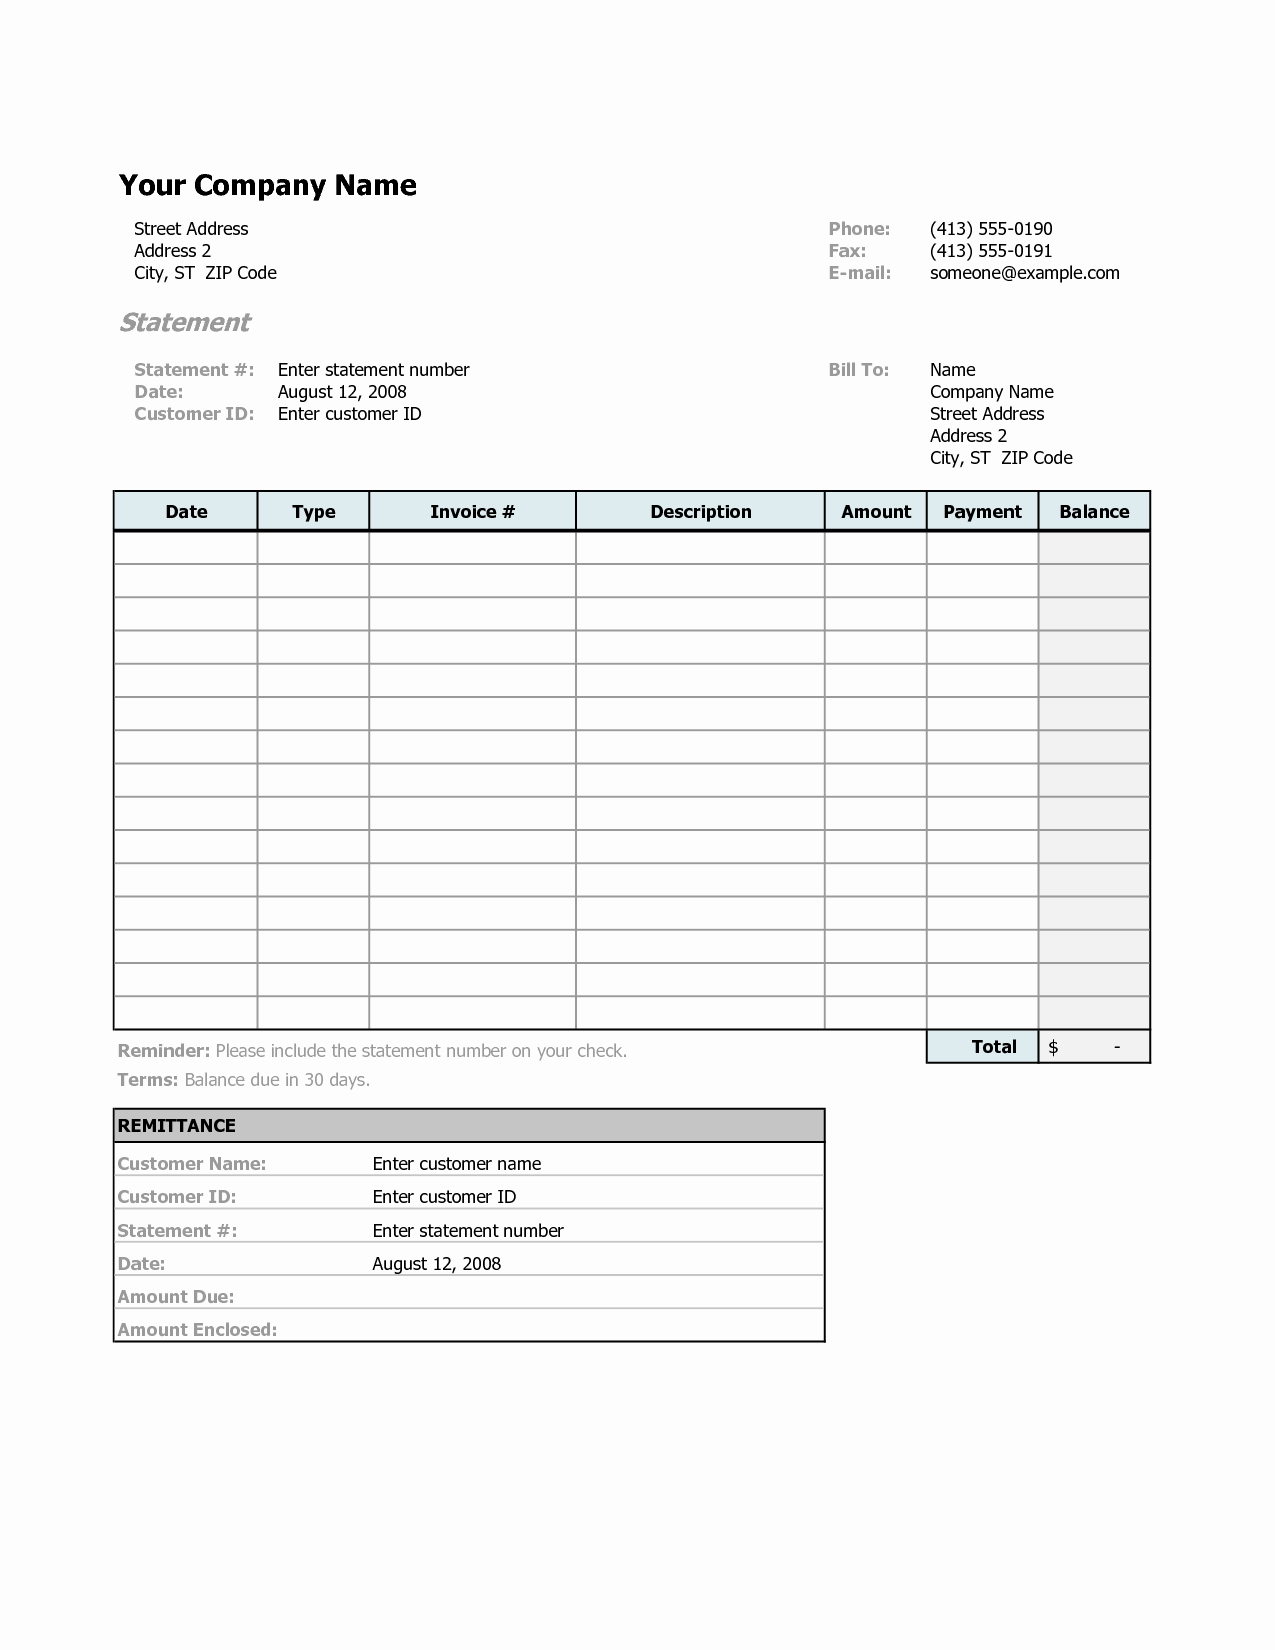 Free Printable Billing Statement Excel Template for Your